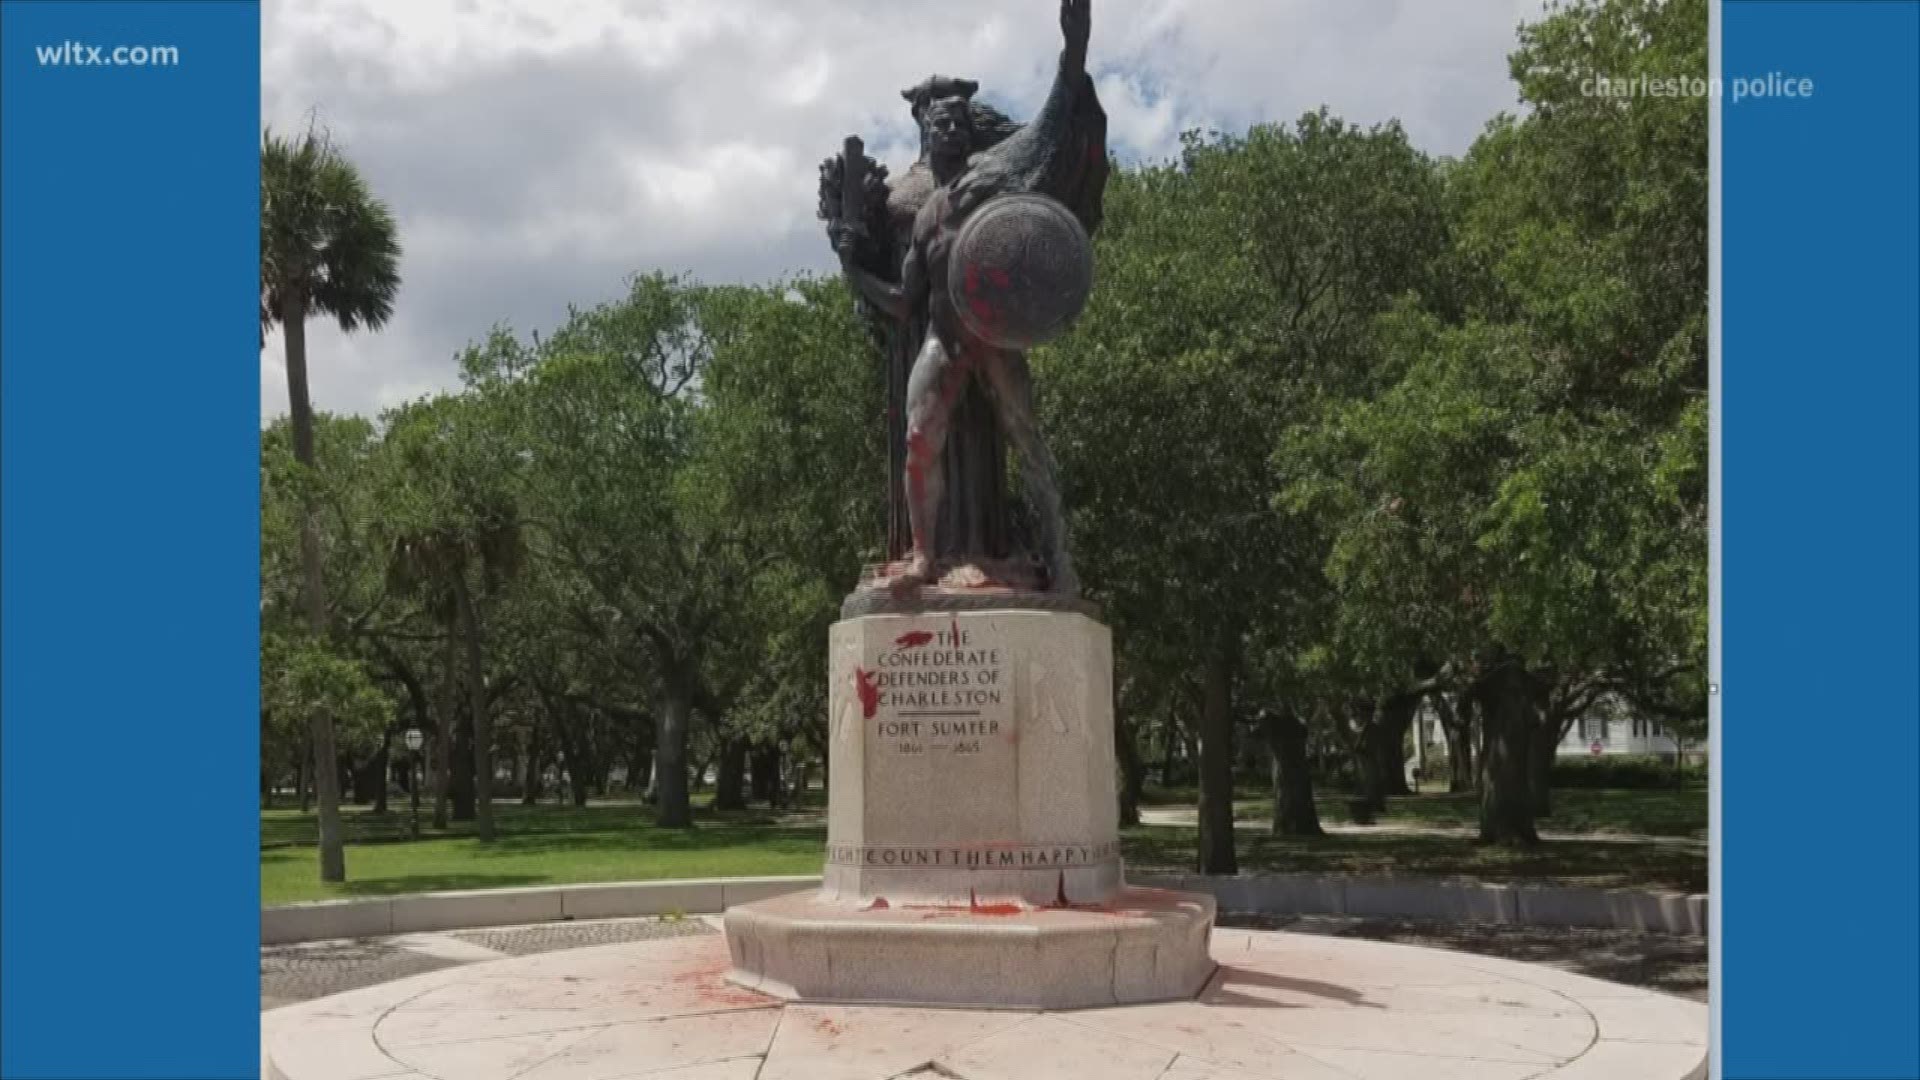 Police in Charleston have arrested two people after they splashed red paint on a Confederate monument.